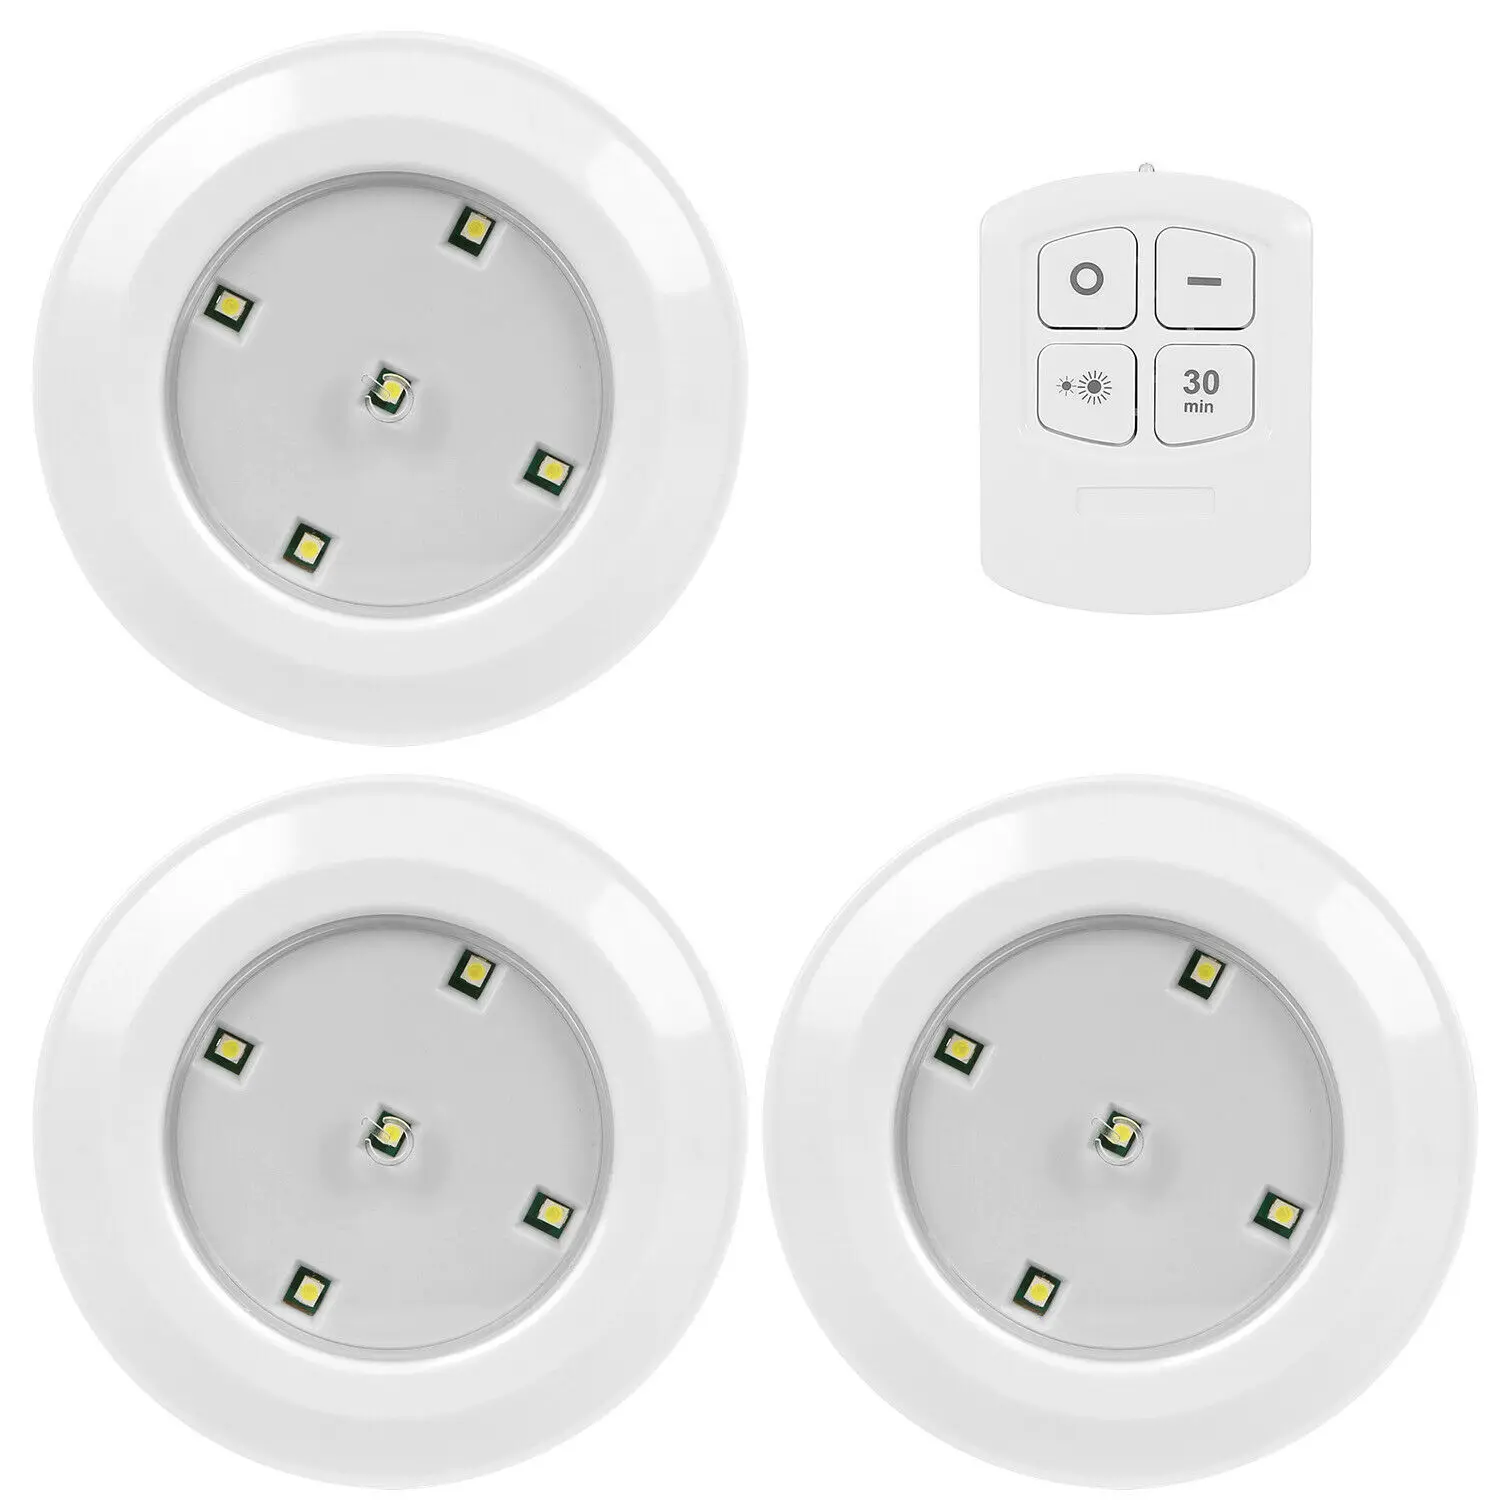 3 Pack Remote Control LED Security Night Light Cordless Battery-Powered Lamp US 